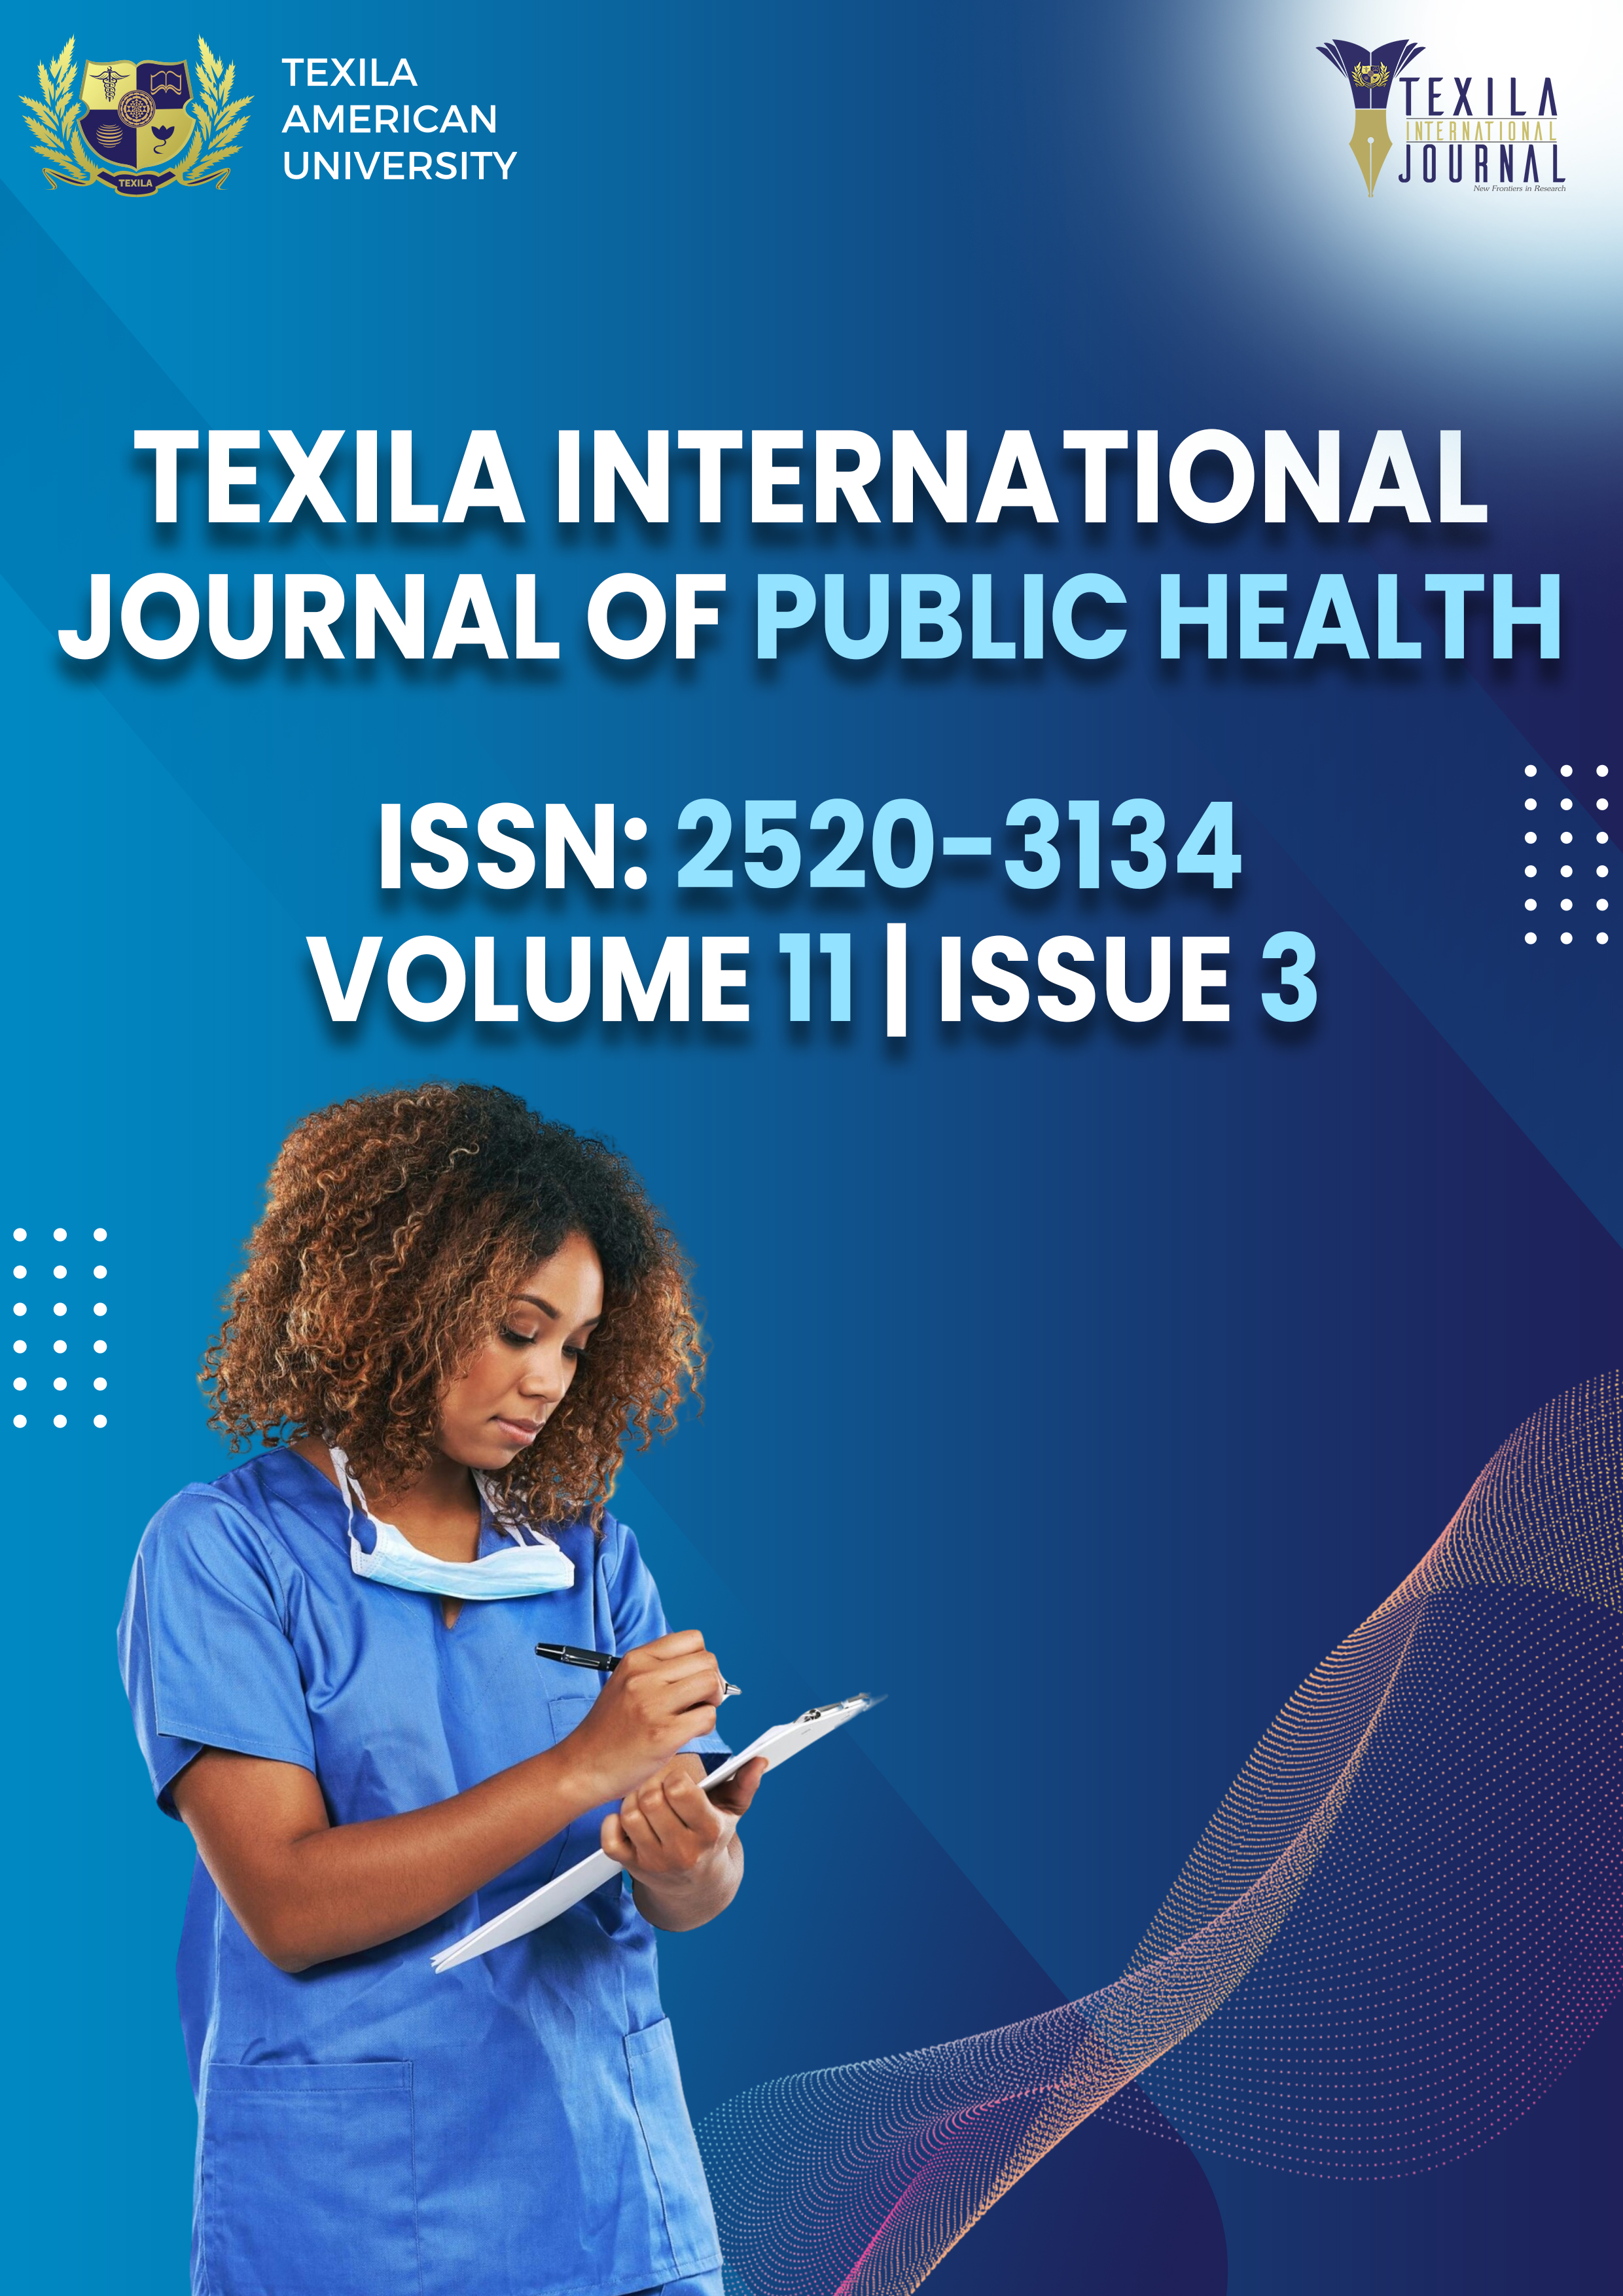 Current Issue Volume 11, Issue 3, TEXILA INTERNATIONAL JOURNAL OF PUBLIC  HEALTH